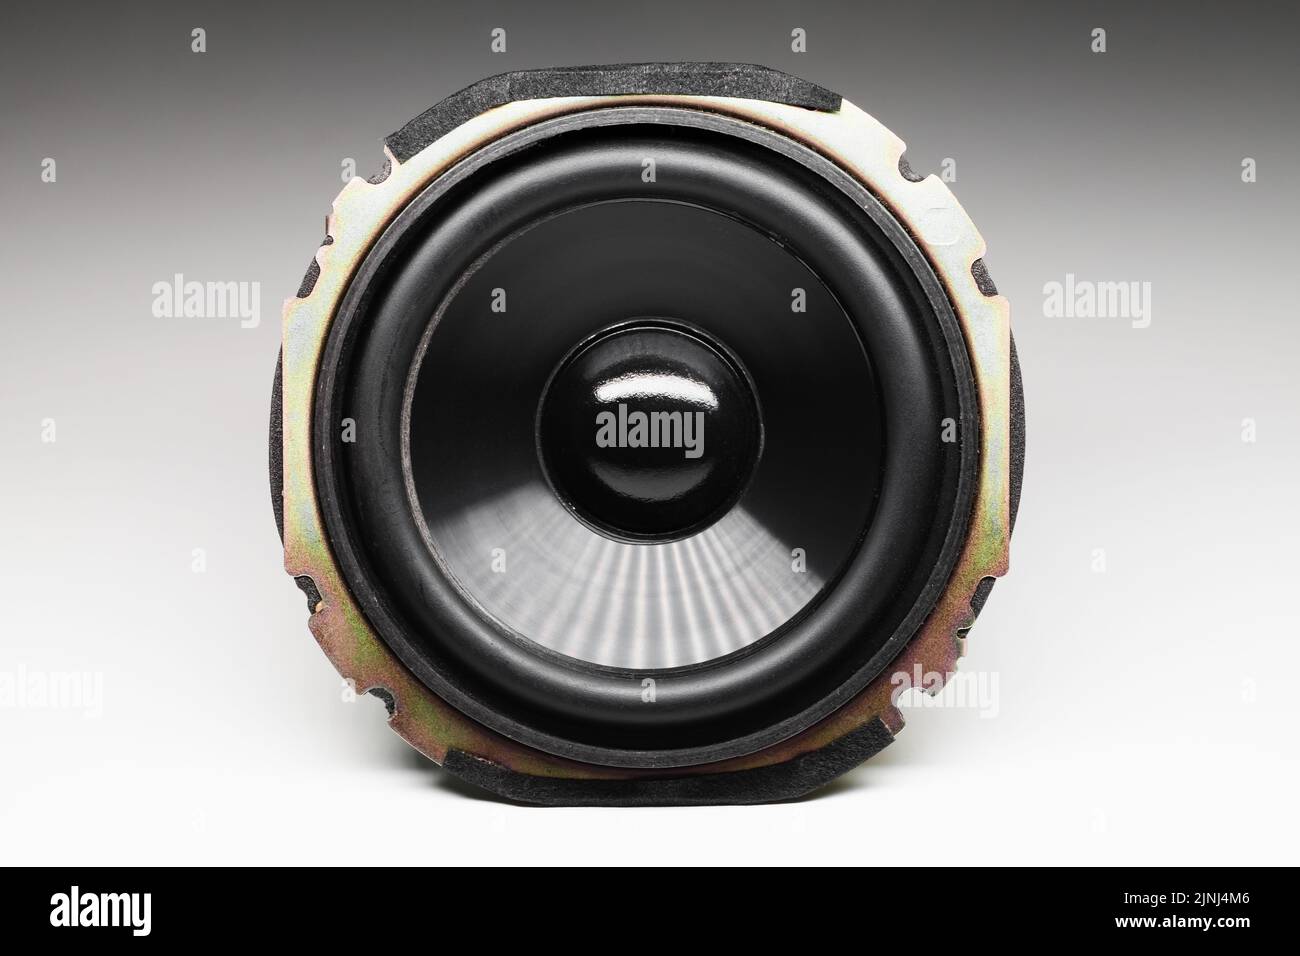 Shiny black audio speaker is on a white background with soft shadow, Hi-Fi audio system component, close-up photo, front view Stock Photo